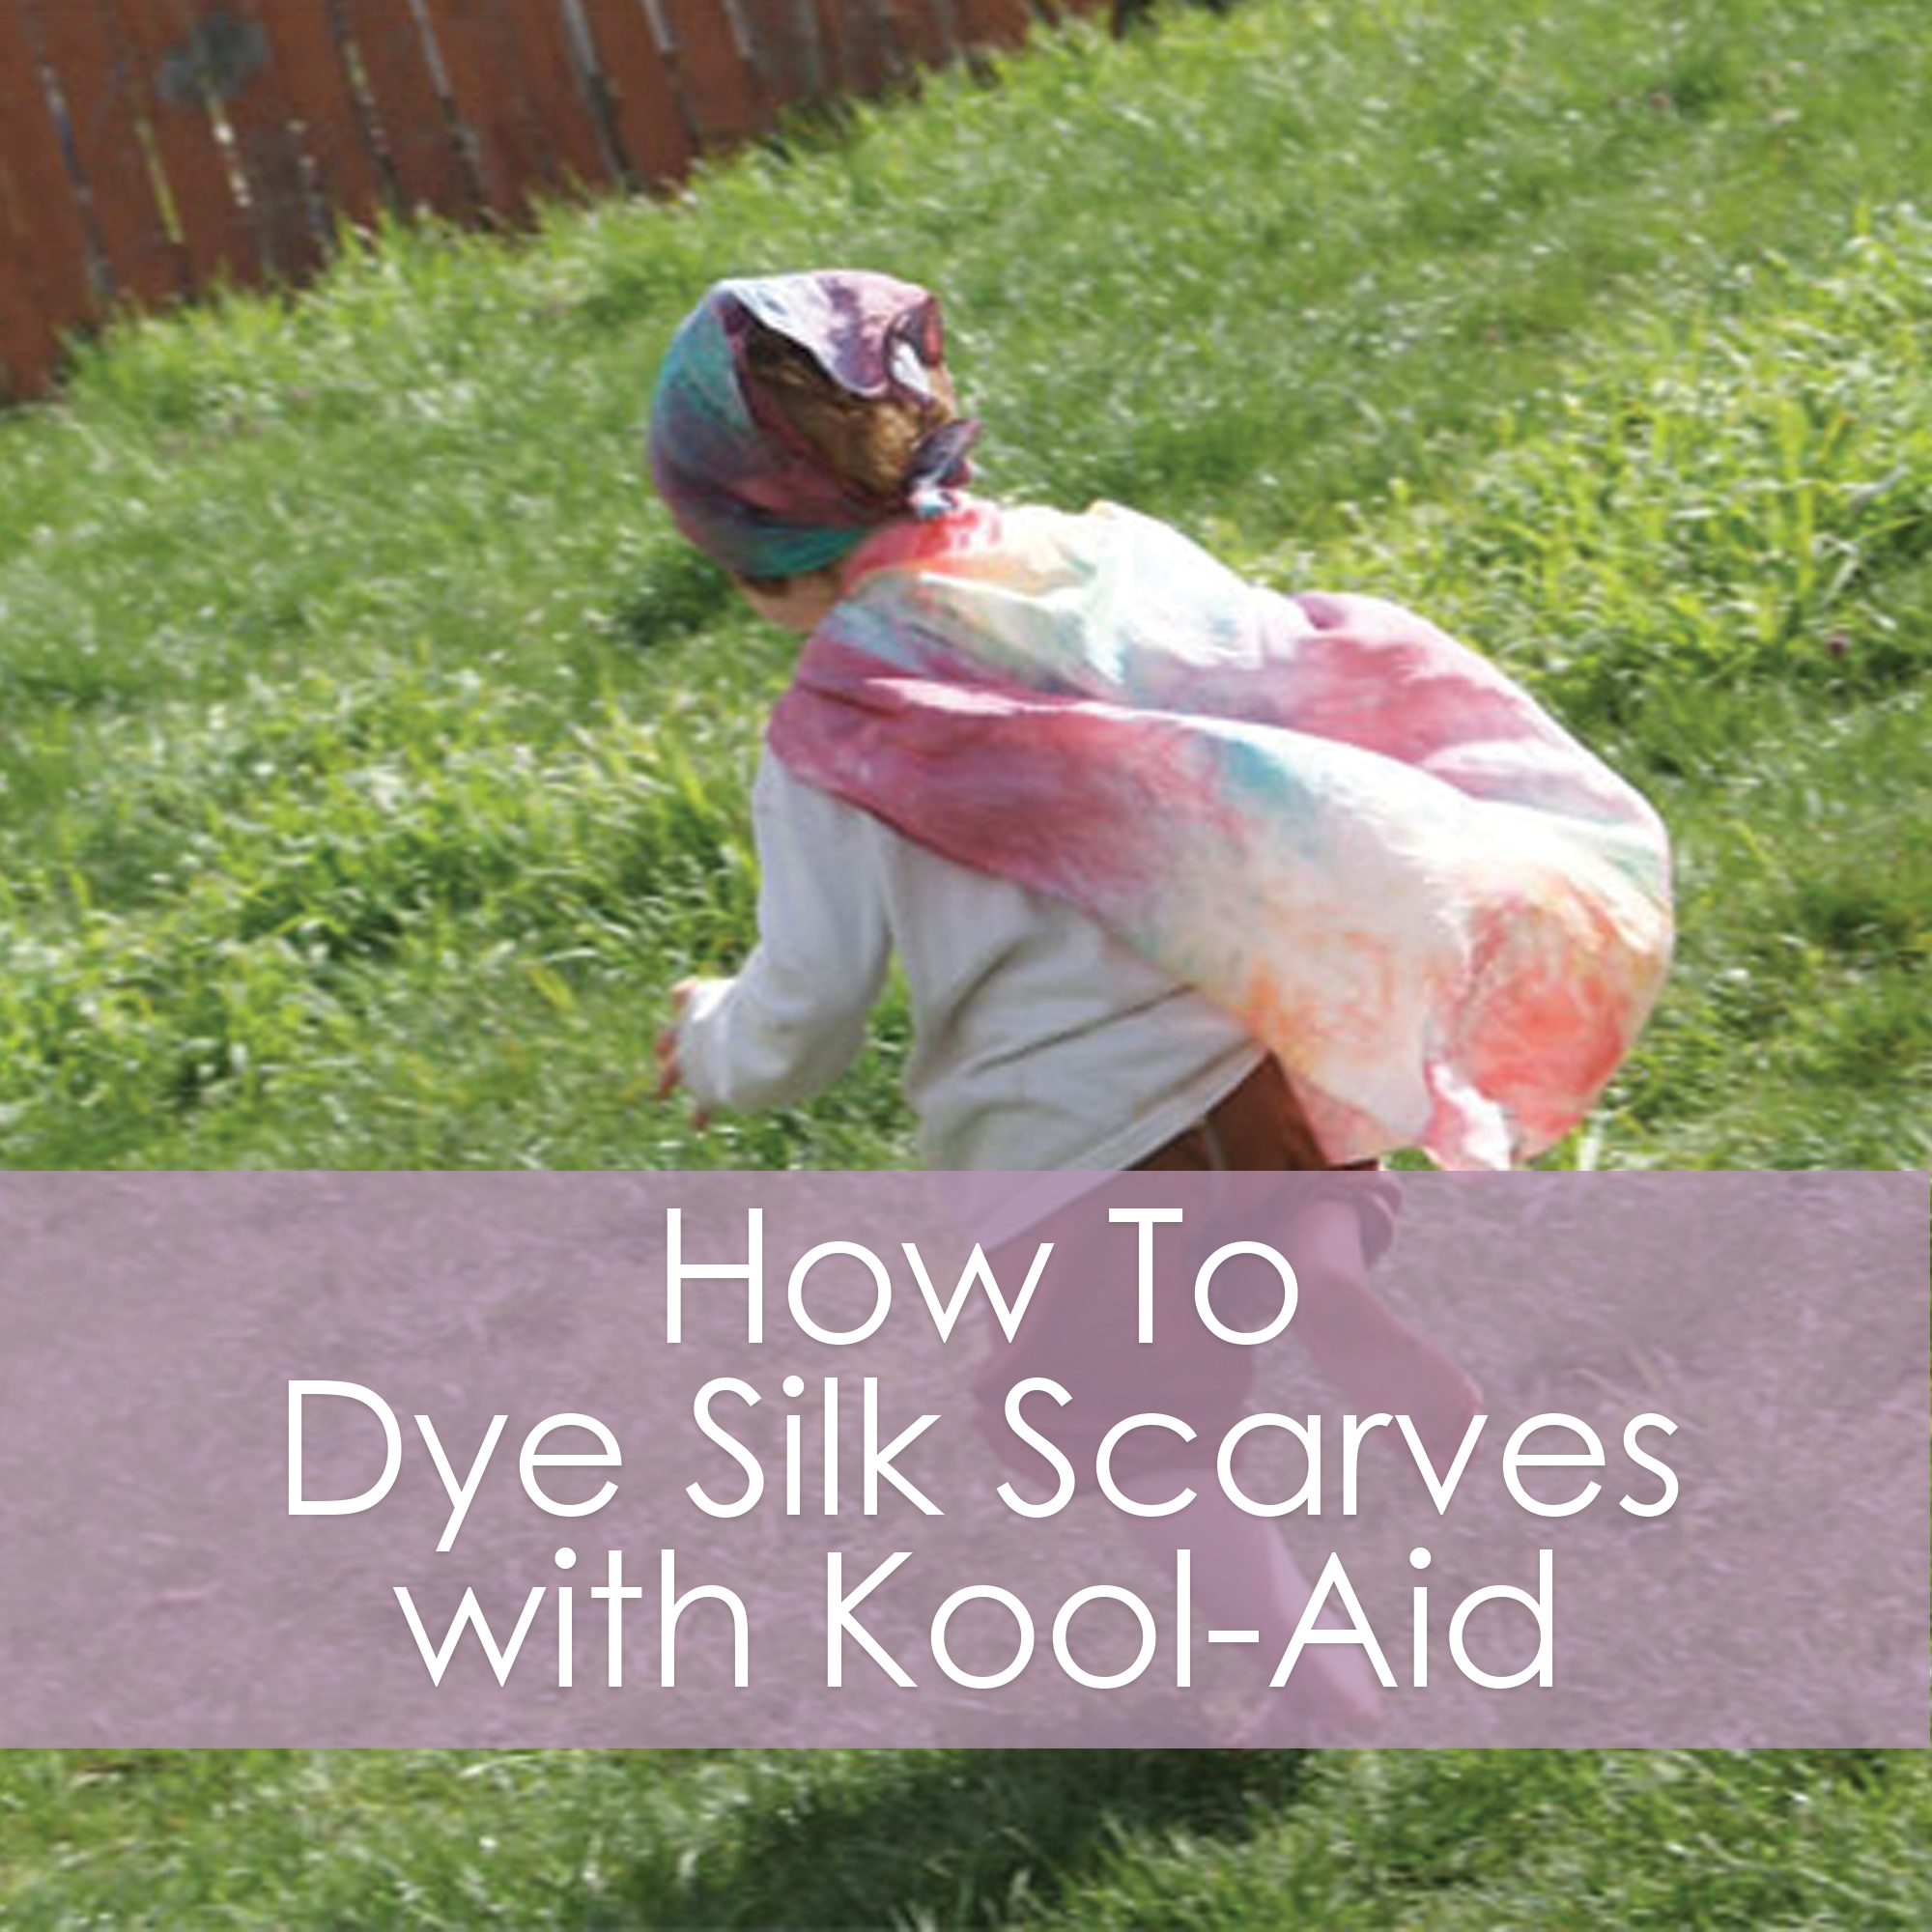 How To Dye Silk Scarves with Kool-Aid - a tutorial from Muse of the Morning